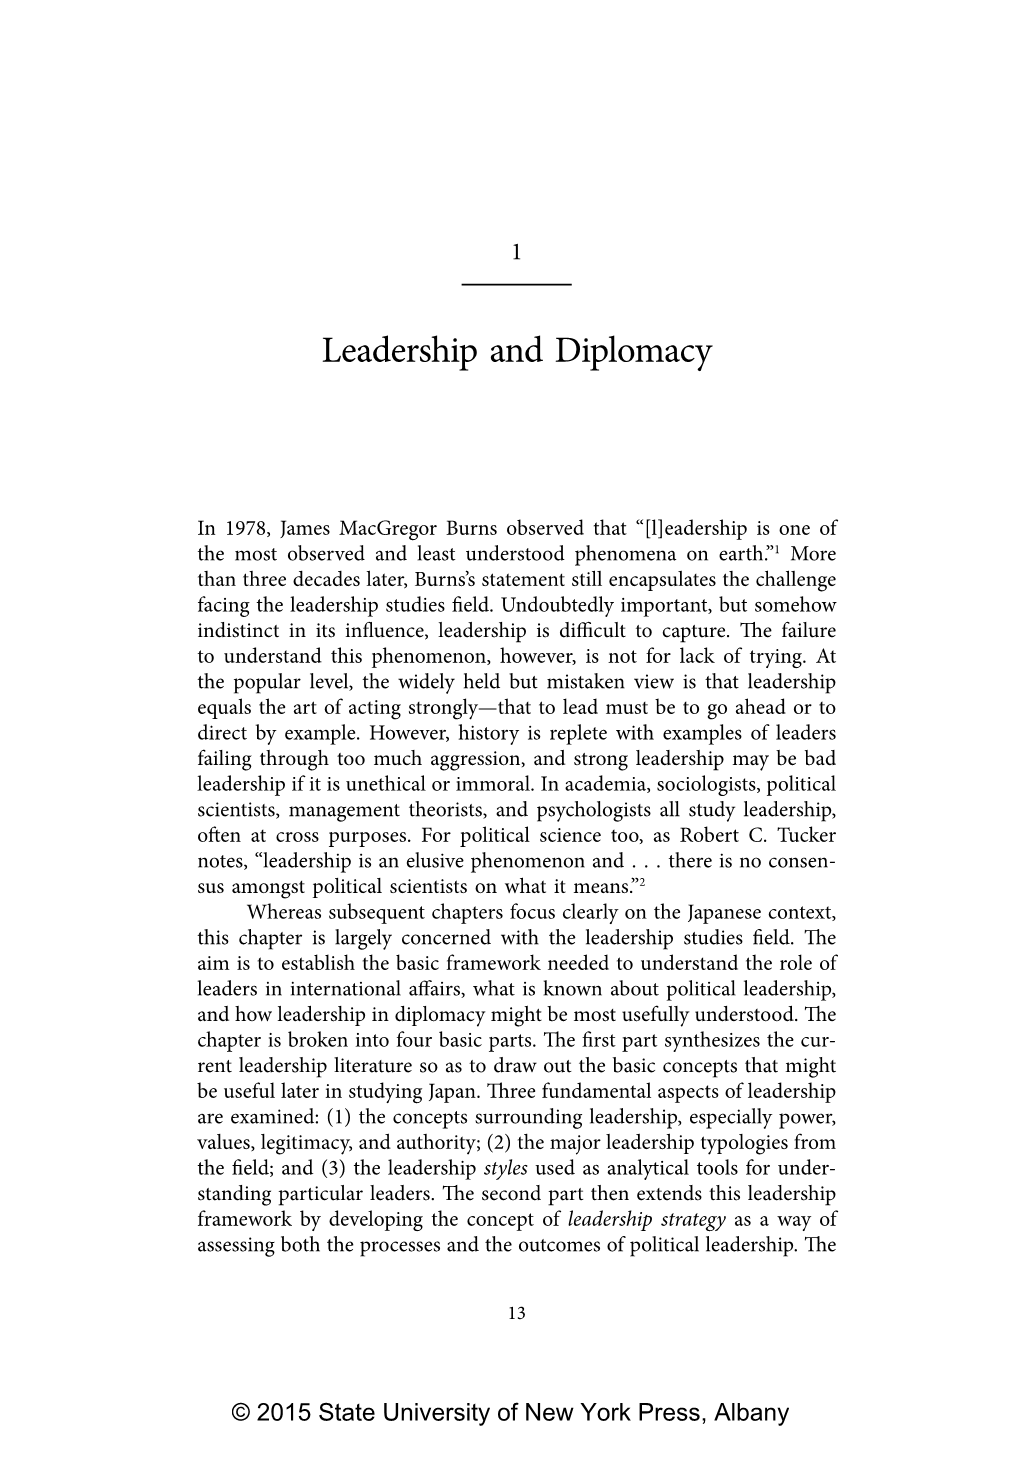 Japanese Diplomacy Third Part Explains the Domestic and International Environmental Context in Which Leadership Operates, and Also How These Environments Are Linked